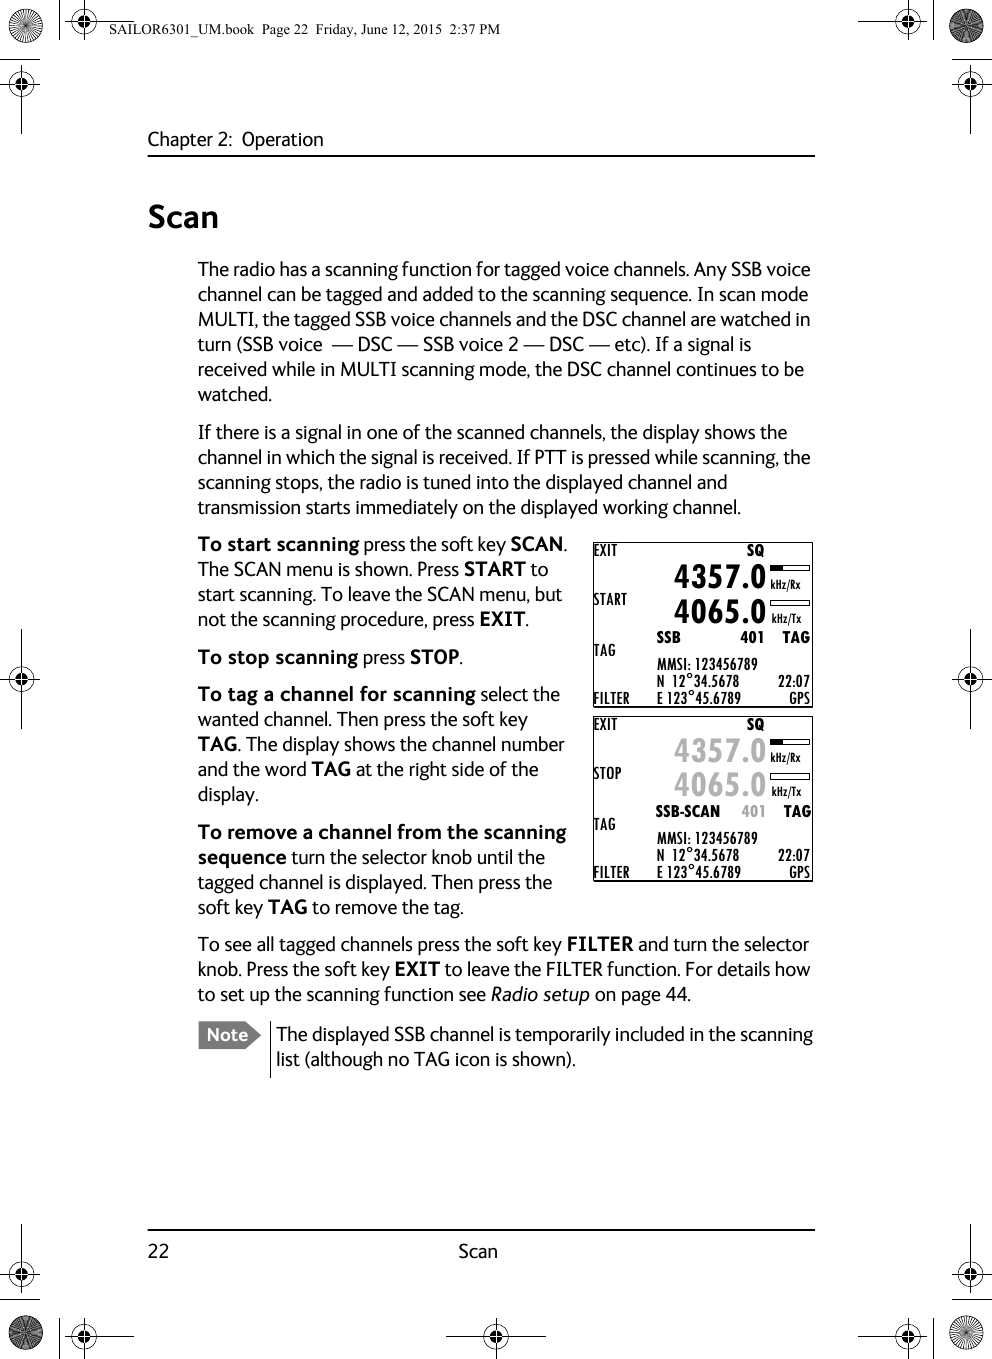 Chapter 2:  Operation22 ScanScanThe radio has a scanning function for tagged voice channels. Any SSB voice channel can be tagged and added to the scanning sequence. In scan mode MULTI, the tagged SSB voice channels and the DSC channel are watched in turn (SSB voice  — DSC — SSB voice 2 — DSC — etc). If a signal is received while in MULTI scanning mode, the DSC channel continues to be watched.If there is a signal in one of the scanned channels, the display shows the channel in which the signal is received. If PTT is pressed while scanning, the scanning stops, the radio is tuned into the displayed channel and transmission starts immediately on the displayed working channel.To start scanning press the soft key SCAN. The SCAN menu is shown. Press START to start scanning. To leave the SCAN menu, but not the scanning procedure, press EXIT.To stop scanning press STOP.To tag a channel for scanning select the wanted channel. Then press the soft key TAG. The display shows the channel number and the word TAG at the right side of the display.To remove a channel from the scanning sequence turn the selector knob until the tagged channel is displayed. Then press the soft key TAG to remove the tag.To see all tagged channels press the soft key FILTER and turn the selector knob. Press the soft key EXIT to leave the FILTER function. For details how to set up the scanning function see Radio setup on page 44.Note The displayed SSB channel is temporarily included in the scanning list (although no TAG icon is shown).EXITSTARTTAGFILTERMMSI: 123456789N  12°34.5678E 123°45.6789 GPS4357.04065.0SSB              401    TAGSQkHz/TxkHz/Rx22:07EXITSTOPTAGFILTERMMSI: 123456789N  12°34.5678E 123°45.6789 GPS4357.04065.0SSB-SCAN     401    TAGSQkHz/TxkHz/Rx22:07SAILOR6301_UM.book  Page 22  Friday, June 12, 2015  2:37 PM